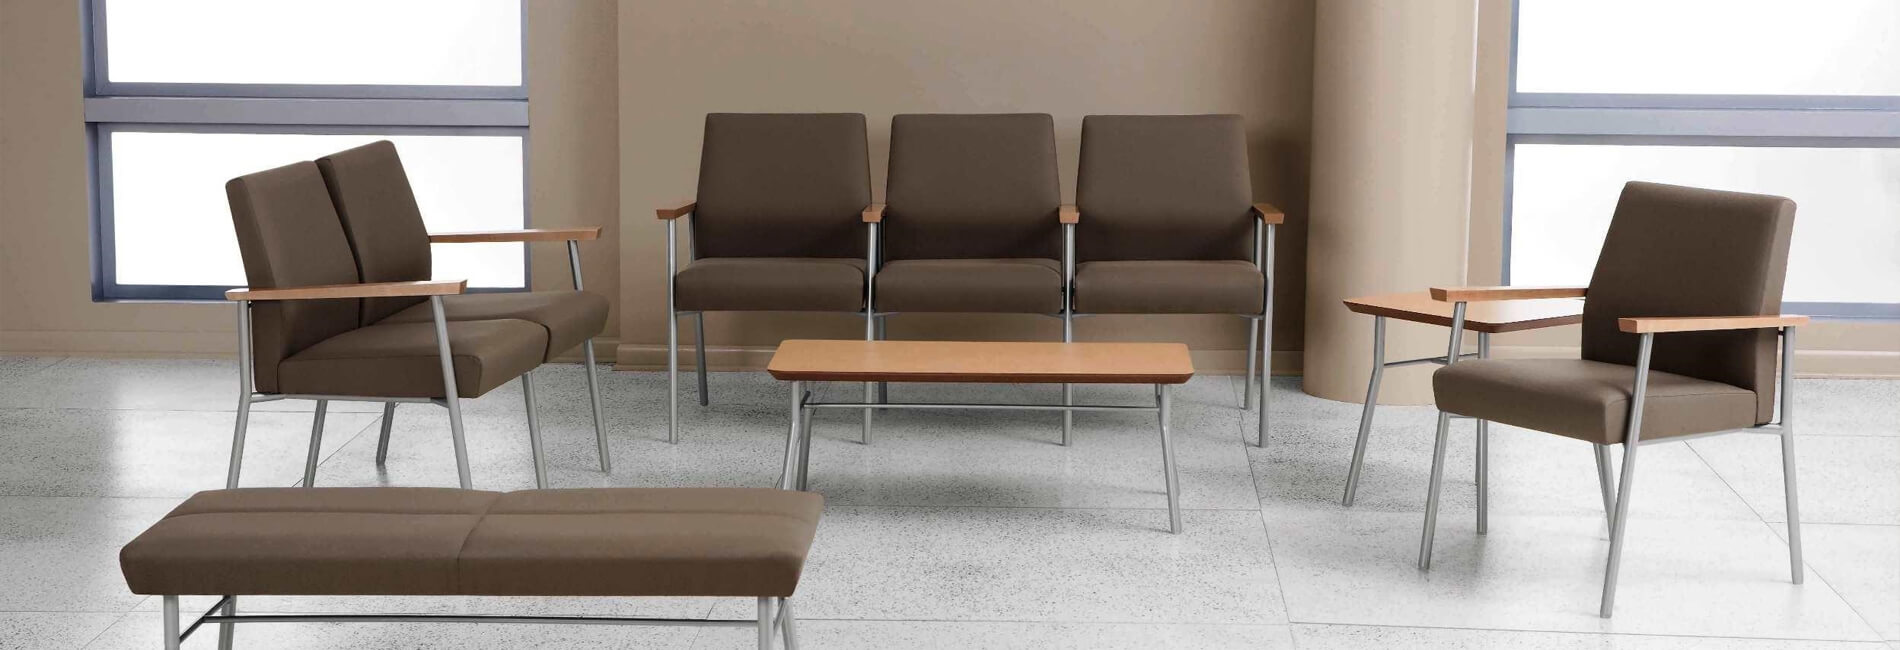 Office Waiting Room Chairs - Office Side Chairs | Office Lounge Chairs ...